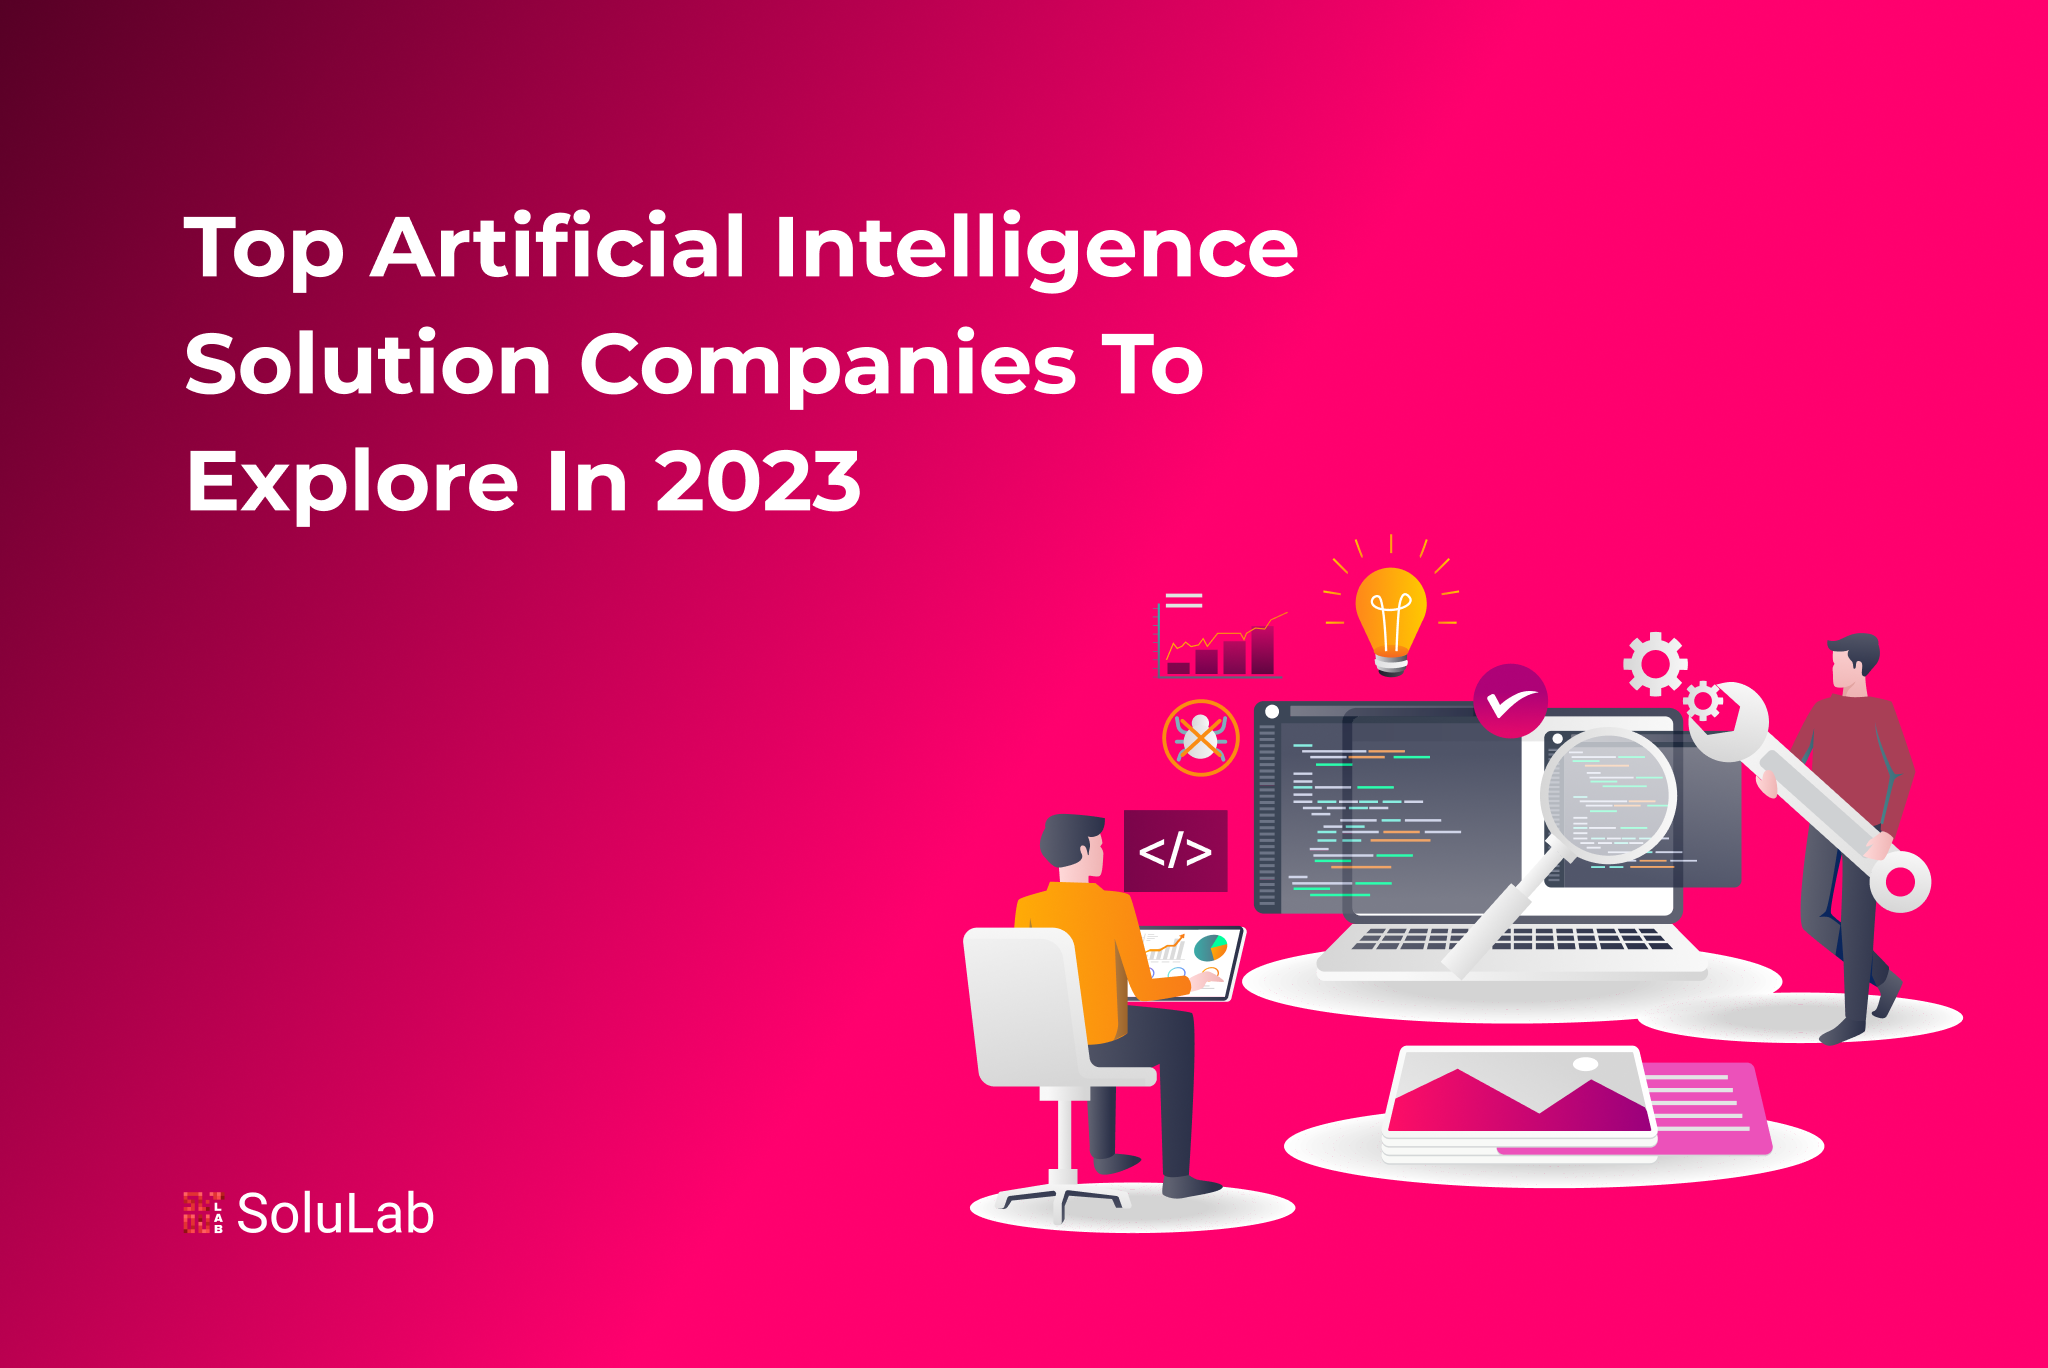 Top Artificial Intelligence Solution Companies To Explore in 2023